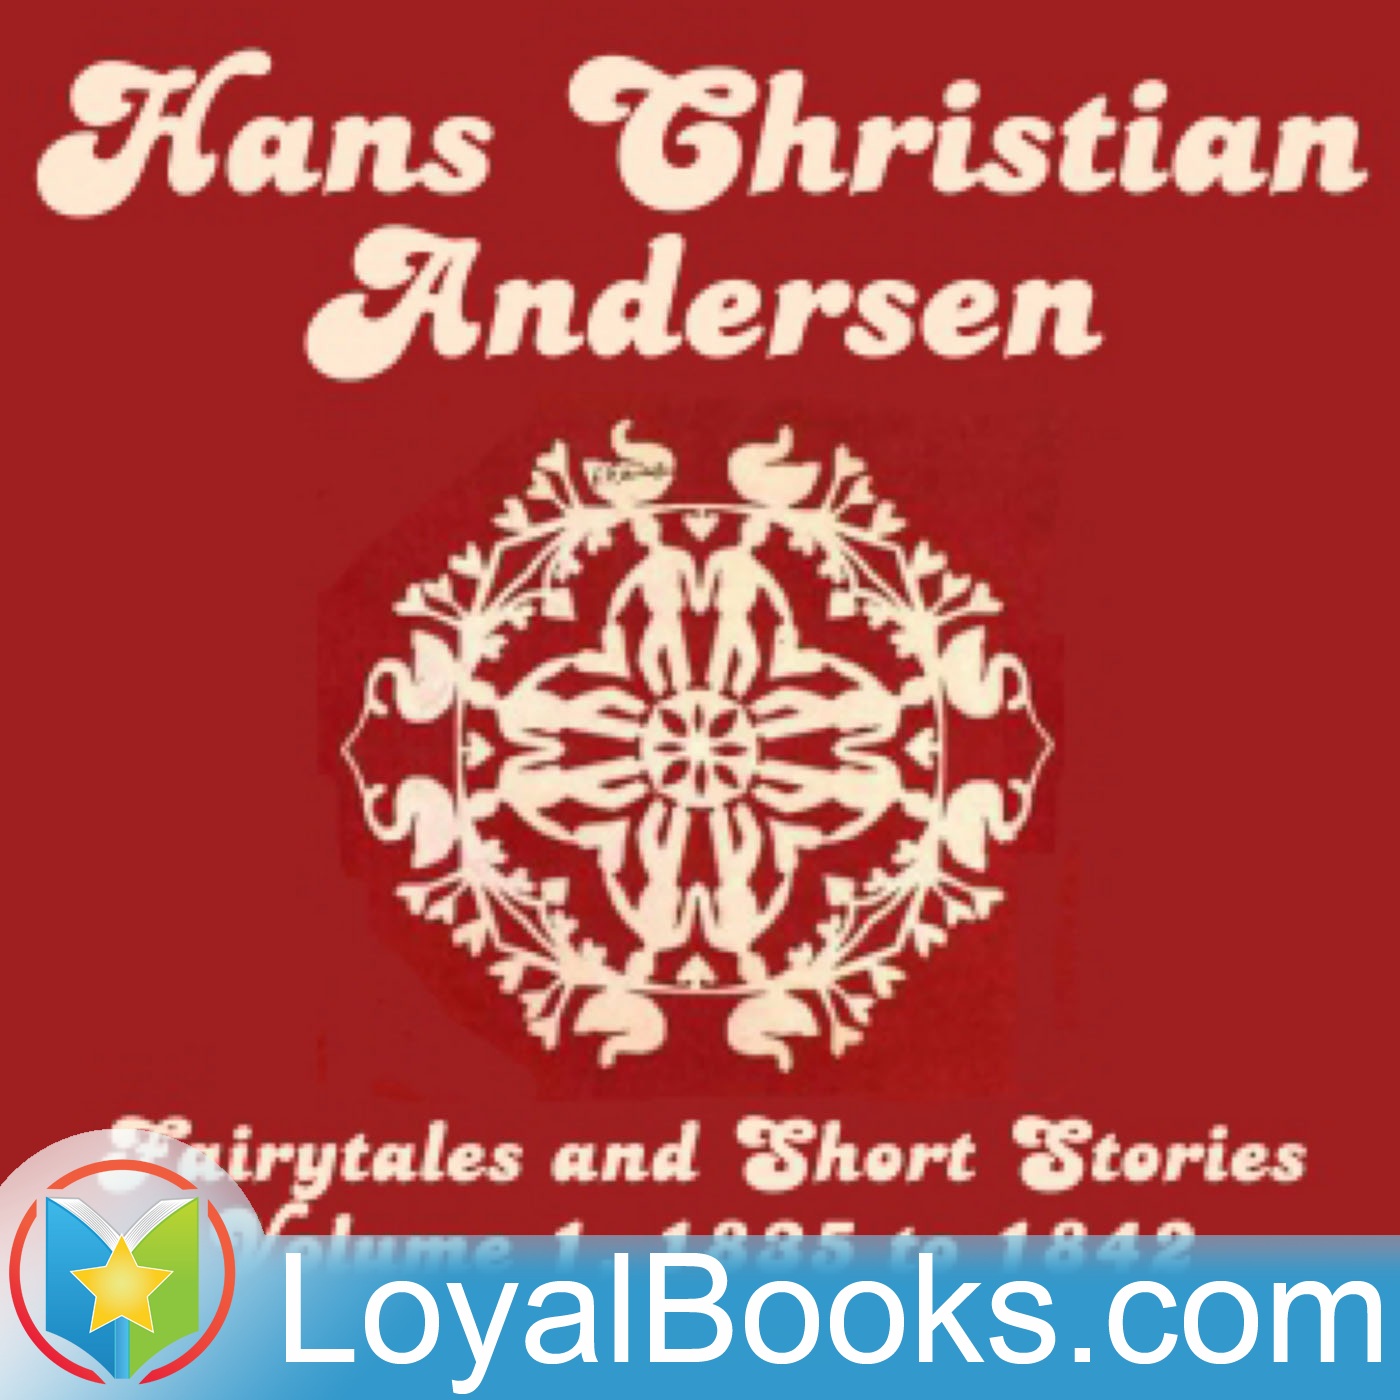 Hans Christian Andersen: Fairytales and Short Stories Volume 1, 1835 to 1842 by Hans Christian Ander...